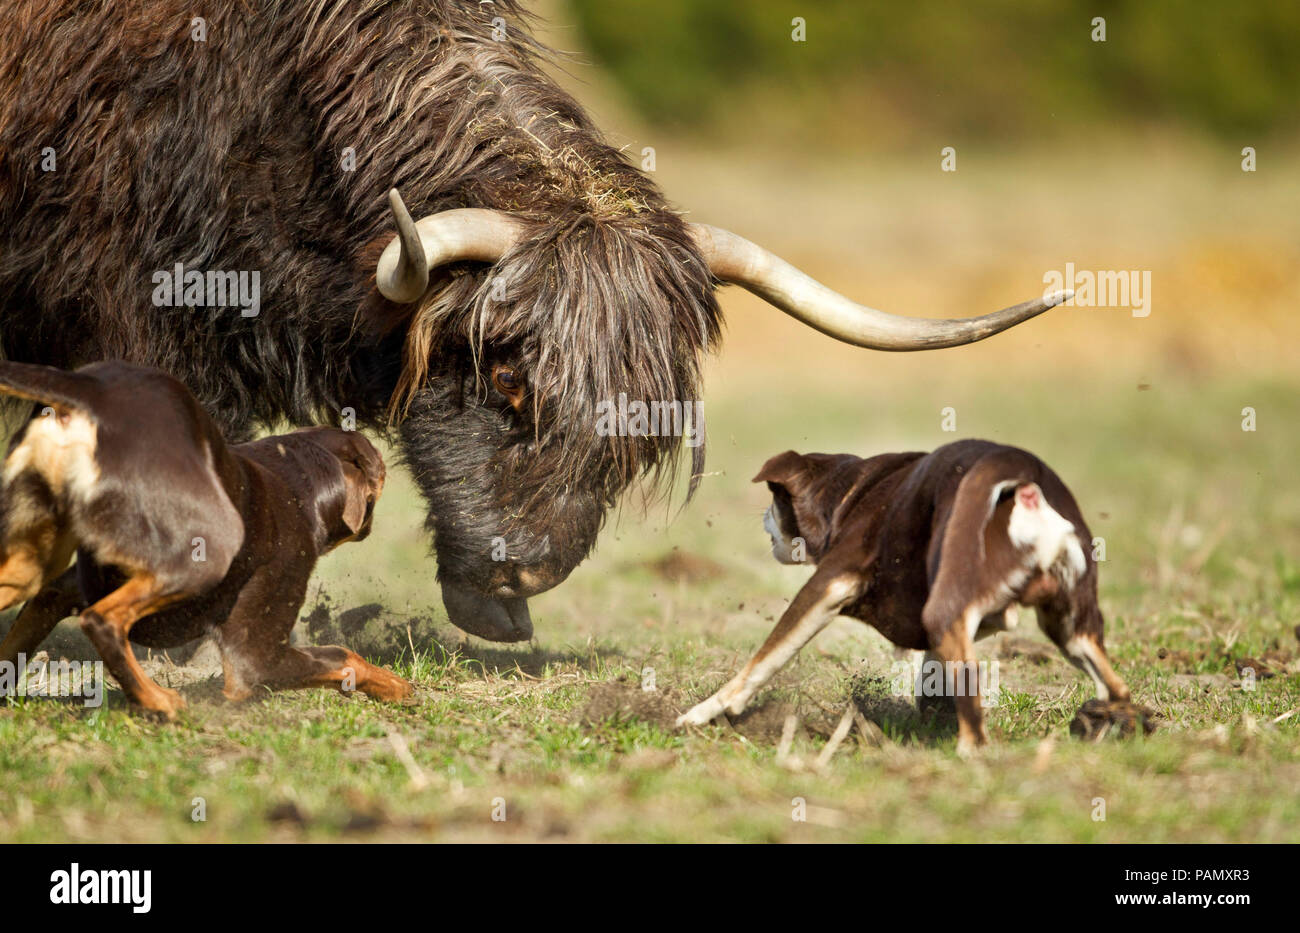 Dogs Working Cattle High Resolution Stock Photography and Images - Alamy